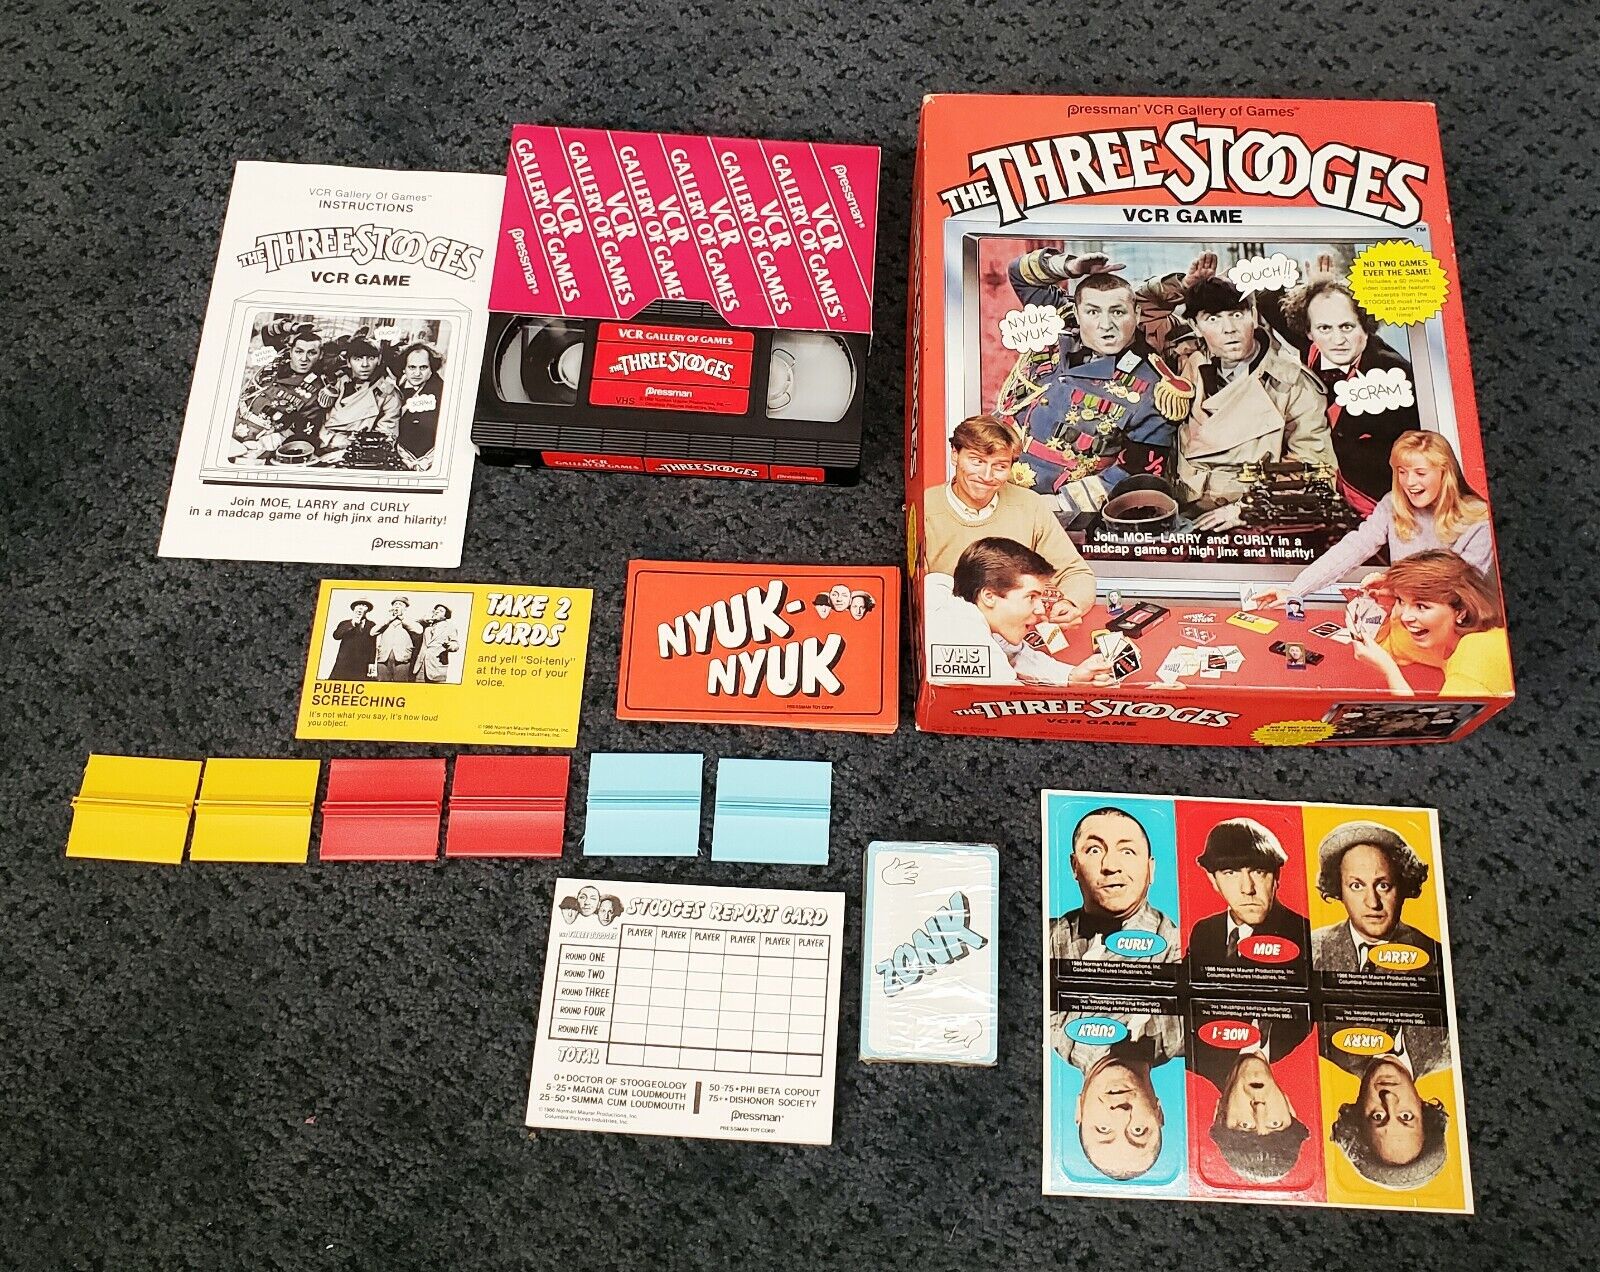 Three Stooges 1986 VCR Game Age 8 Pressman No 2 Games Ever The Same for sale online